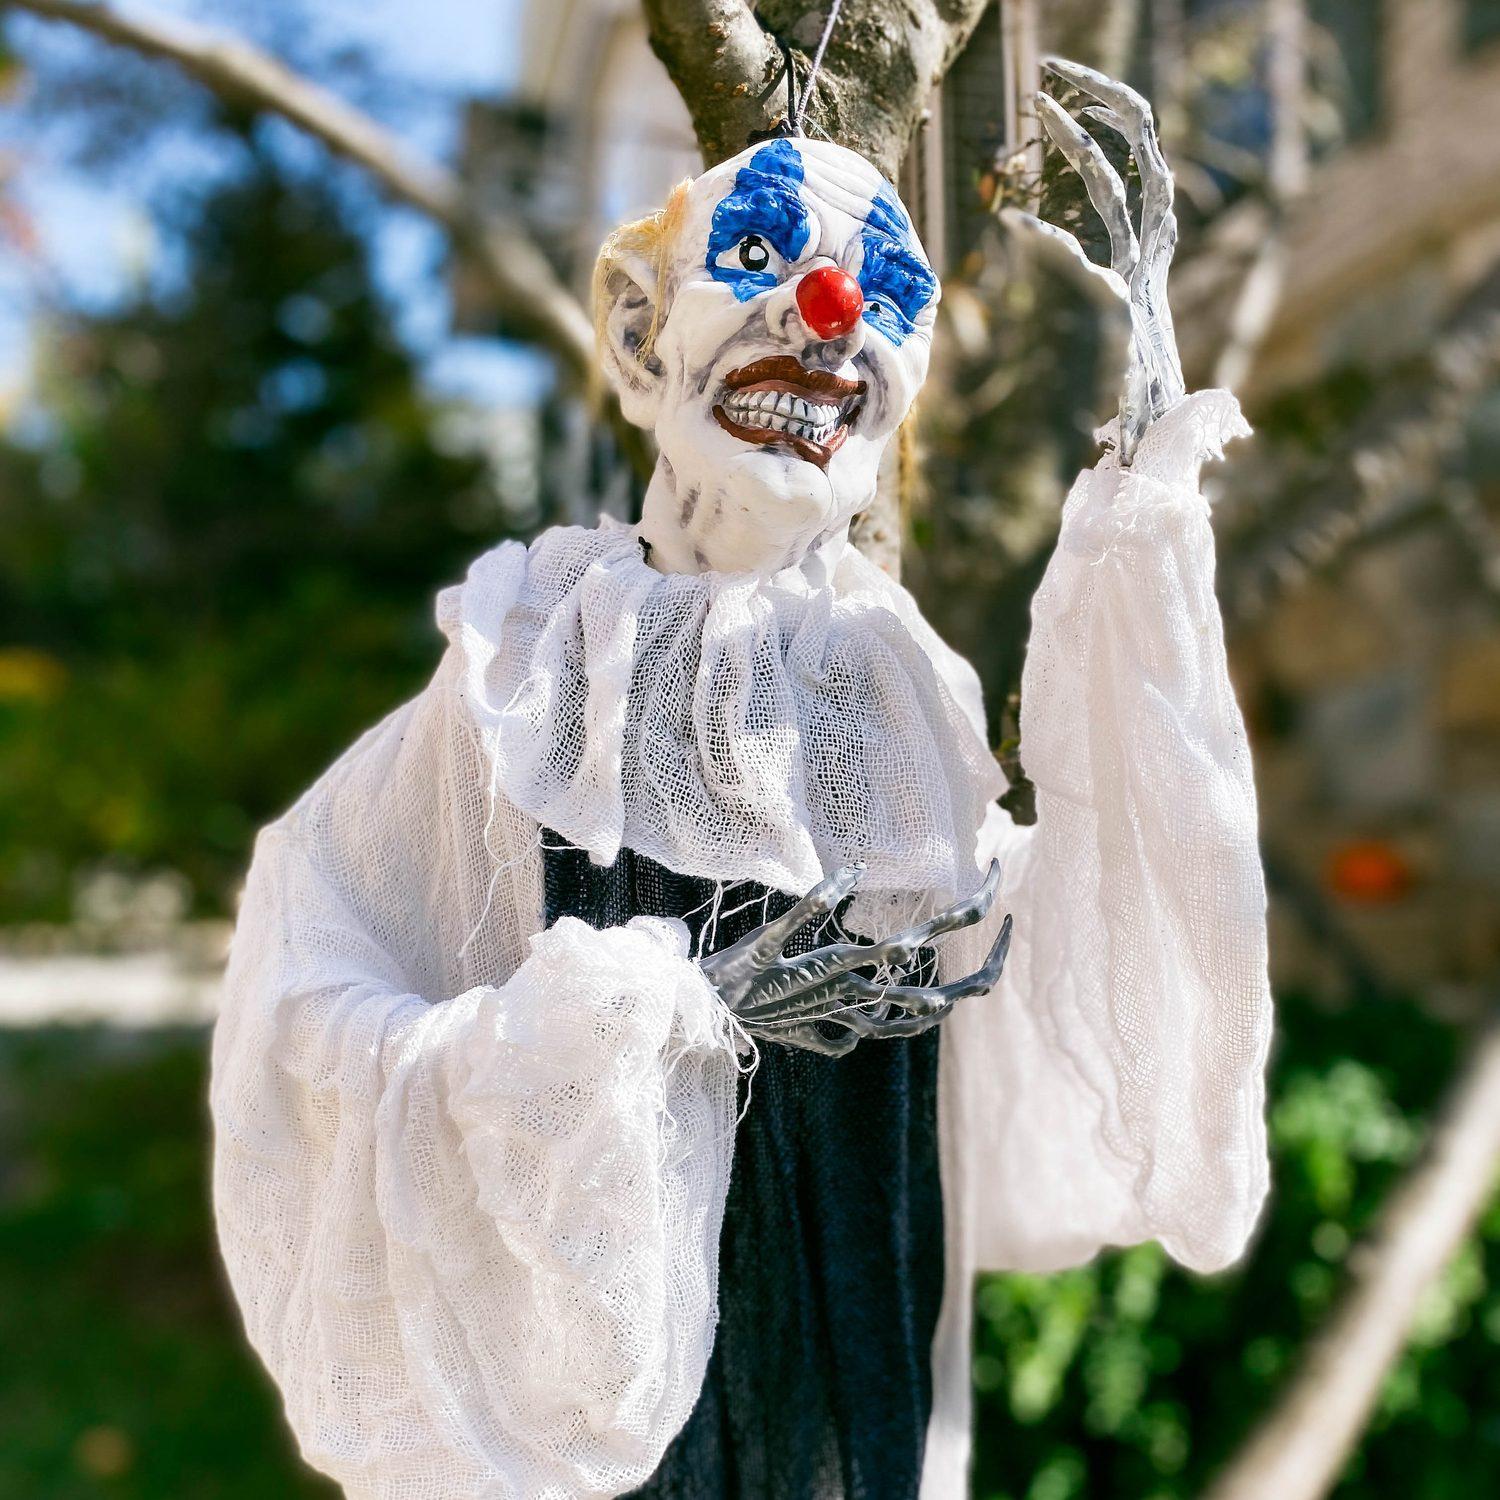 Halloween Pendant Ghost Festival Pumpkin Witch Doll Ornaments Broom Haunted  House Decoration Props Halloween Party Decorations|Party Diy Decorations|  Aliexpress | Halloween Hanging Ghost Festival Pumpkin Witch Hanging  Decorations Broom Haunted House Layout